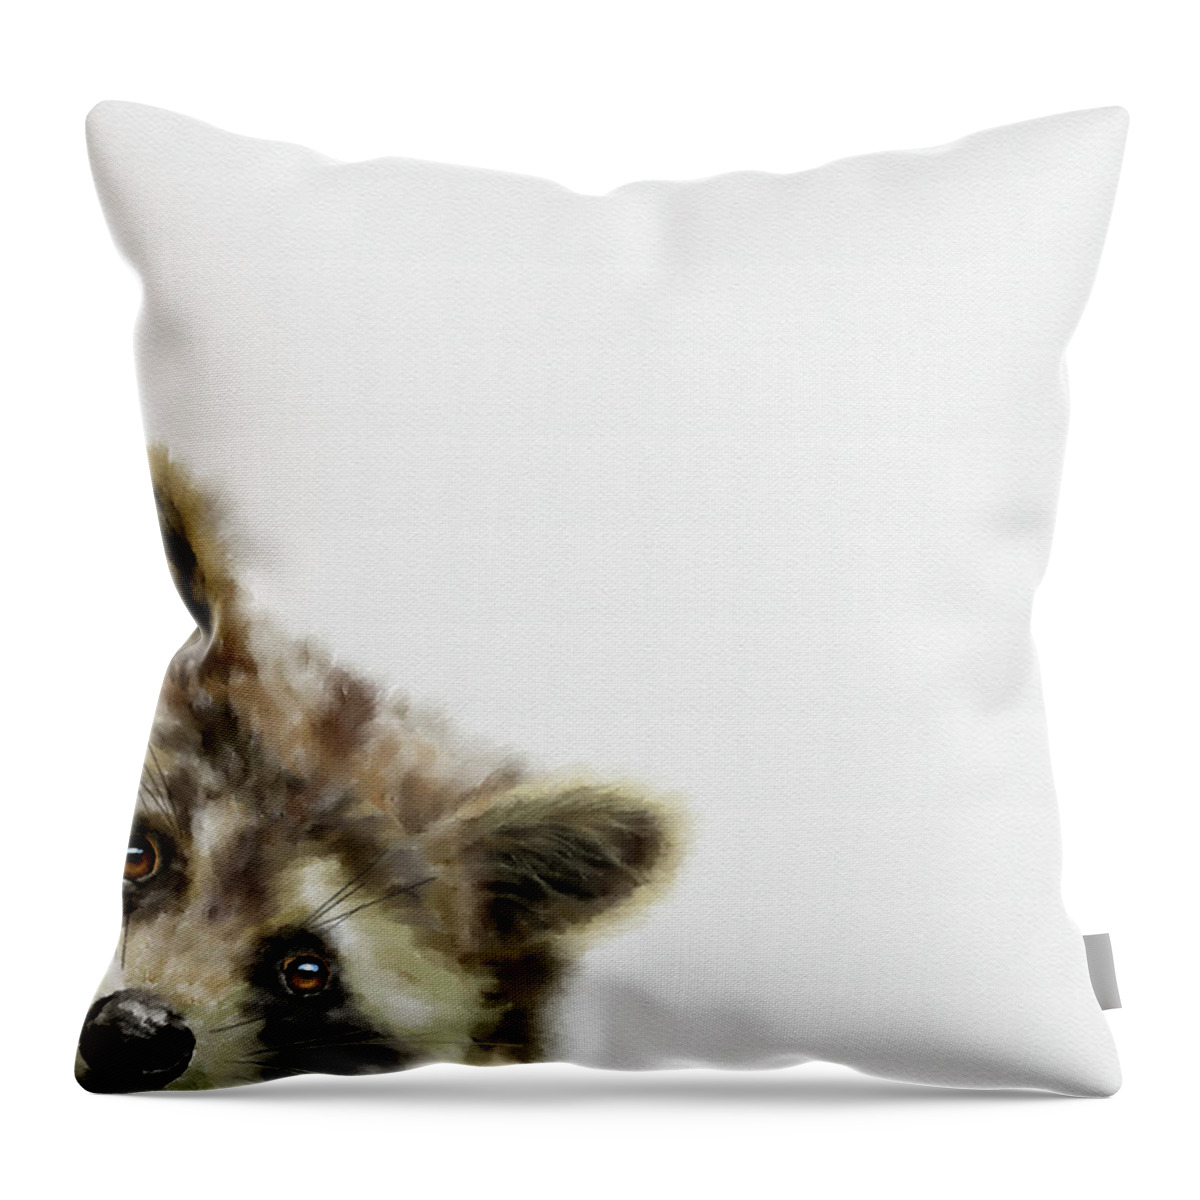 Racoon Throw Pillow featuring the digital art Baby Racoon by Kathie Miller